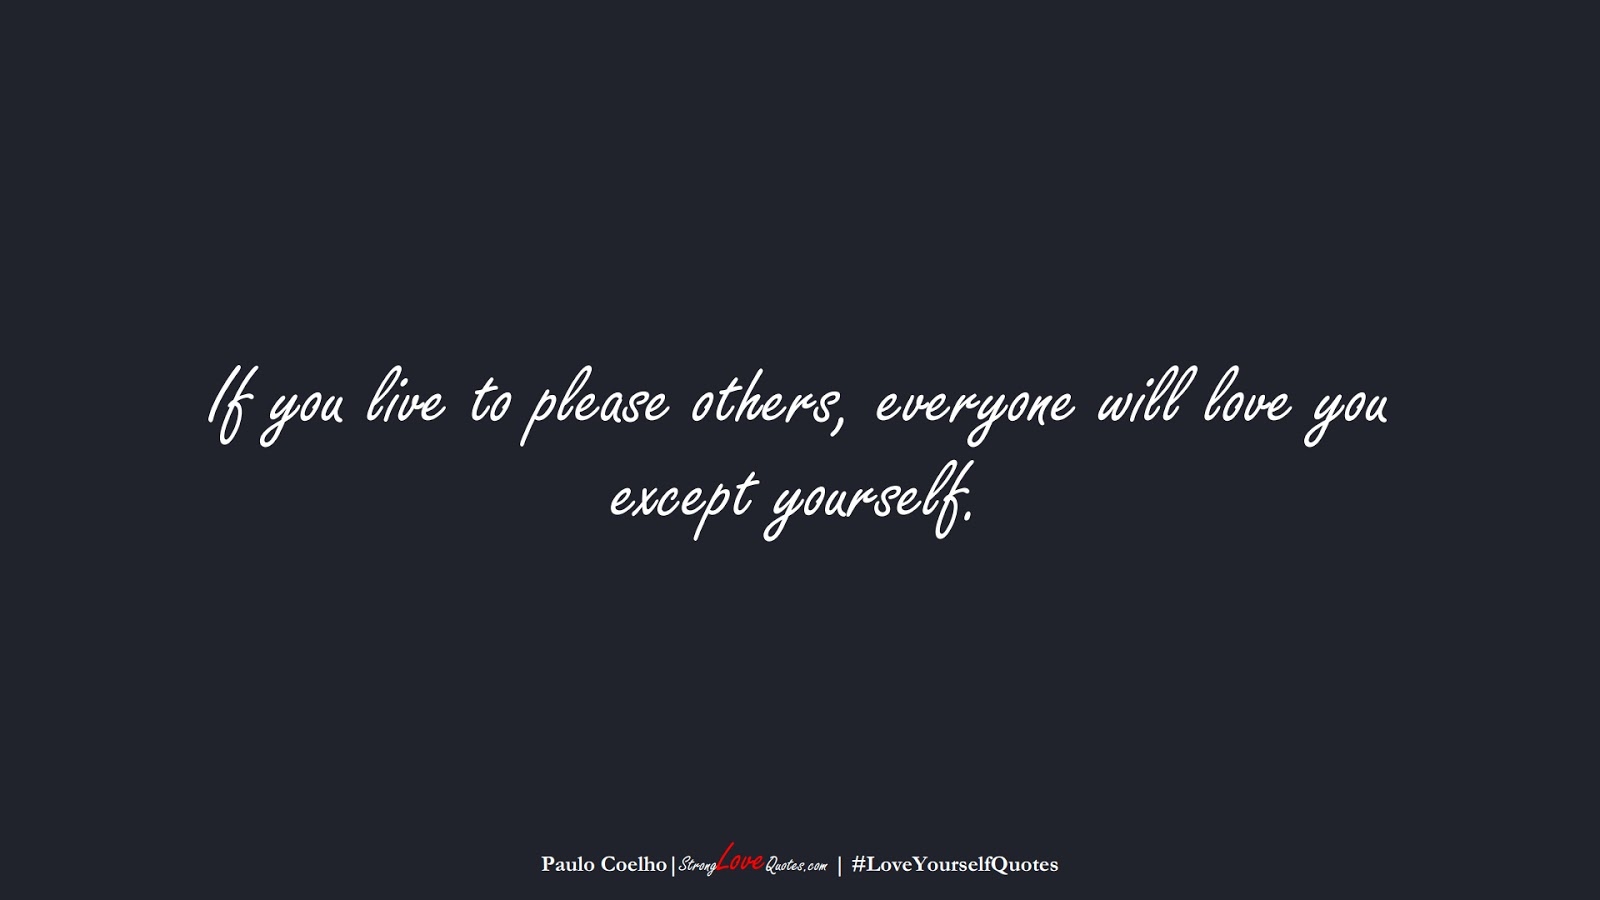 If you live to please others, everyone will love you except yourself. (Paulo Coelho);  #LoveYourselfQuotes